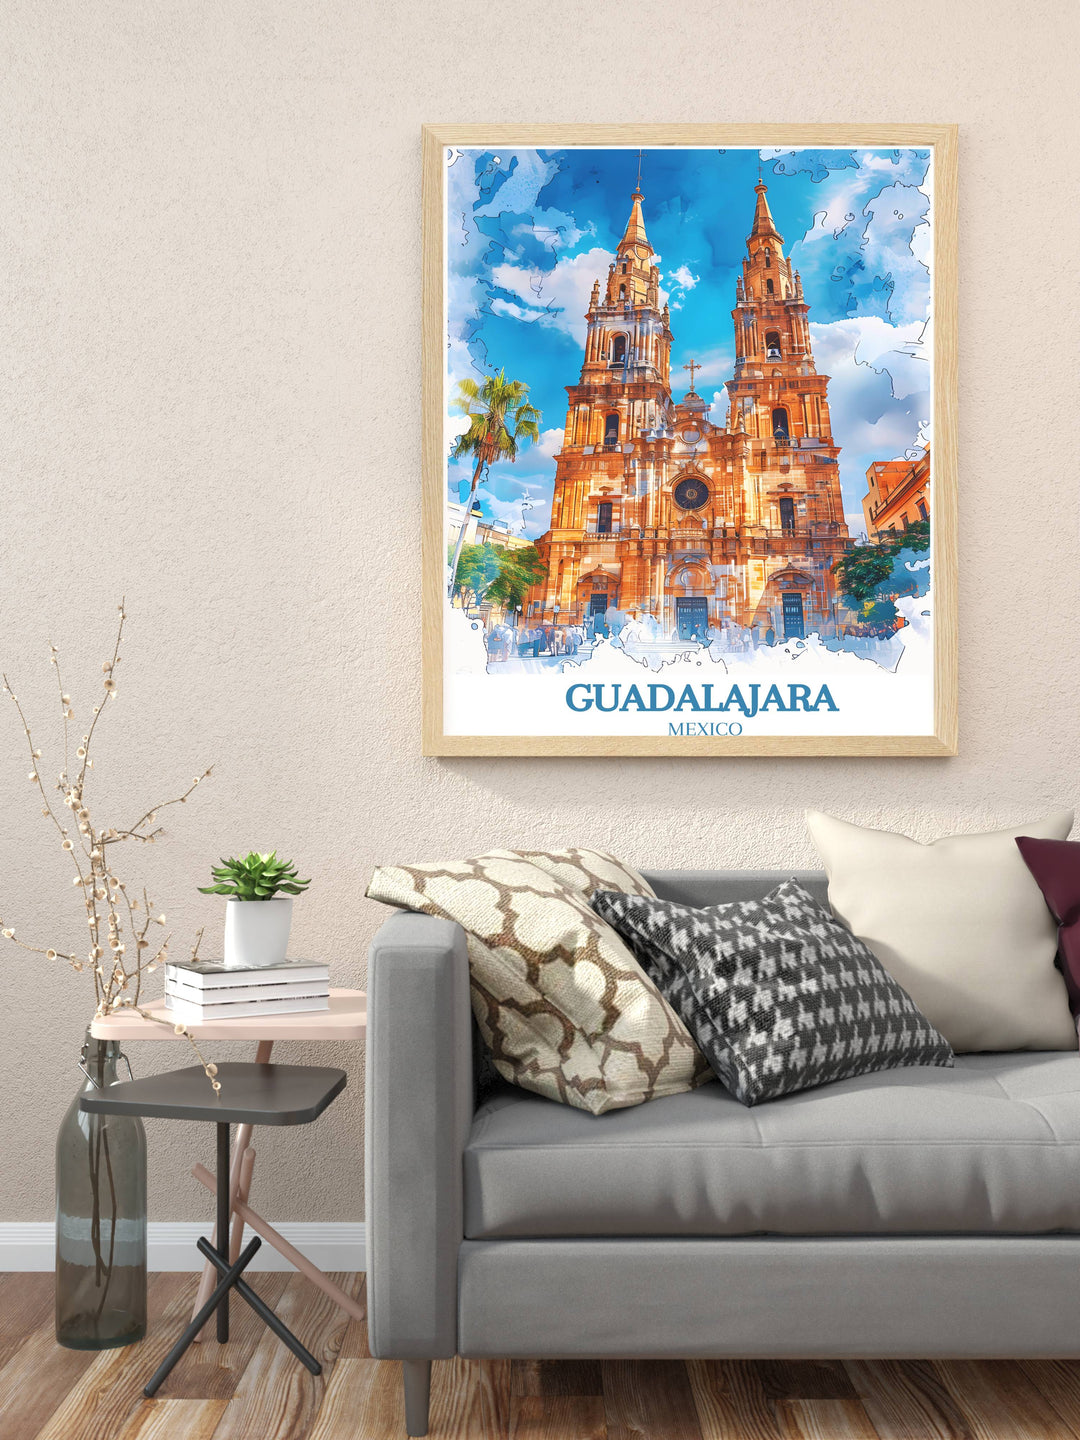 Elegant art print capturing the essence of Guadalajaras street life, from historic architecture to the vibrant flora that lines its avenues